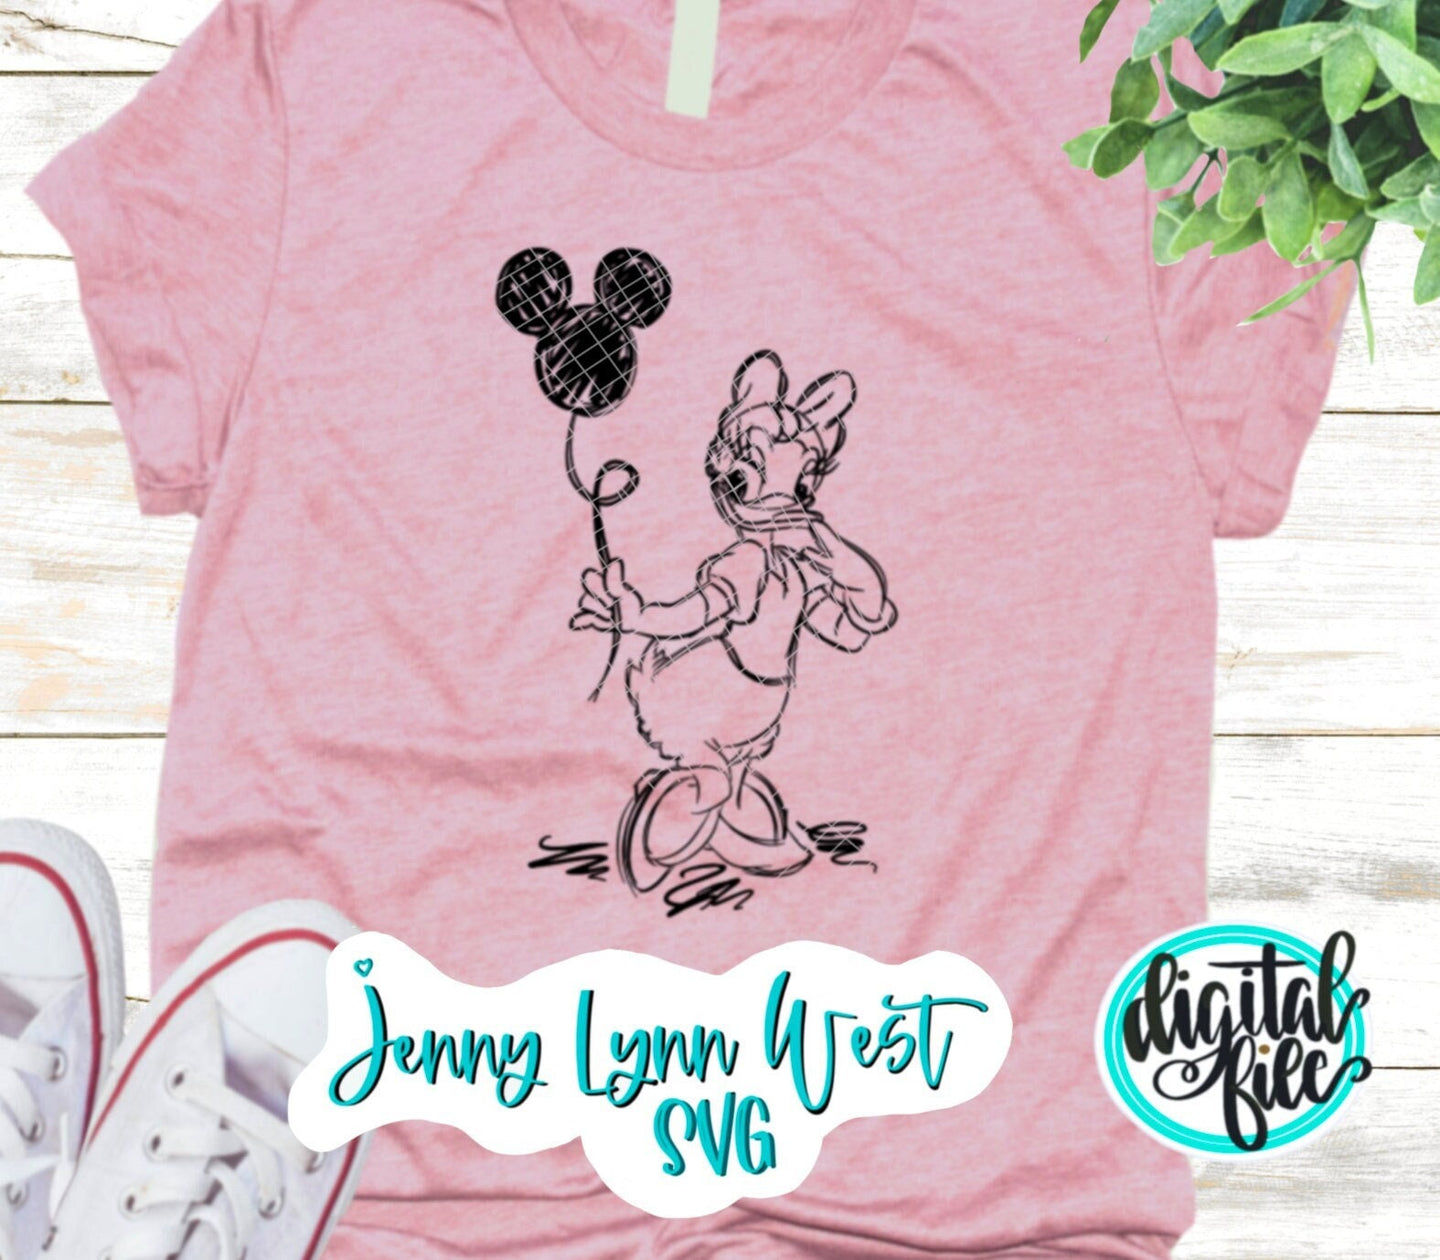 Minnie Mouse SVG, Daisy Duck SVG, Minnie SVG, Mickey Mouse